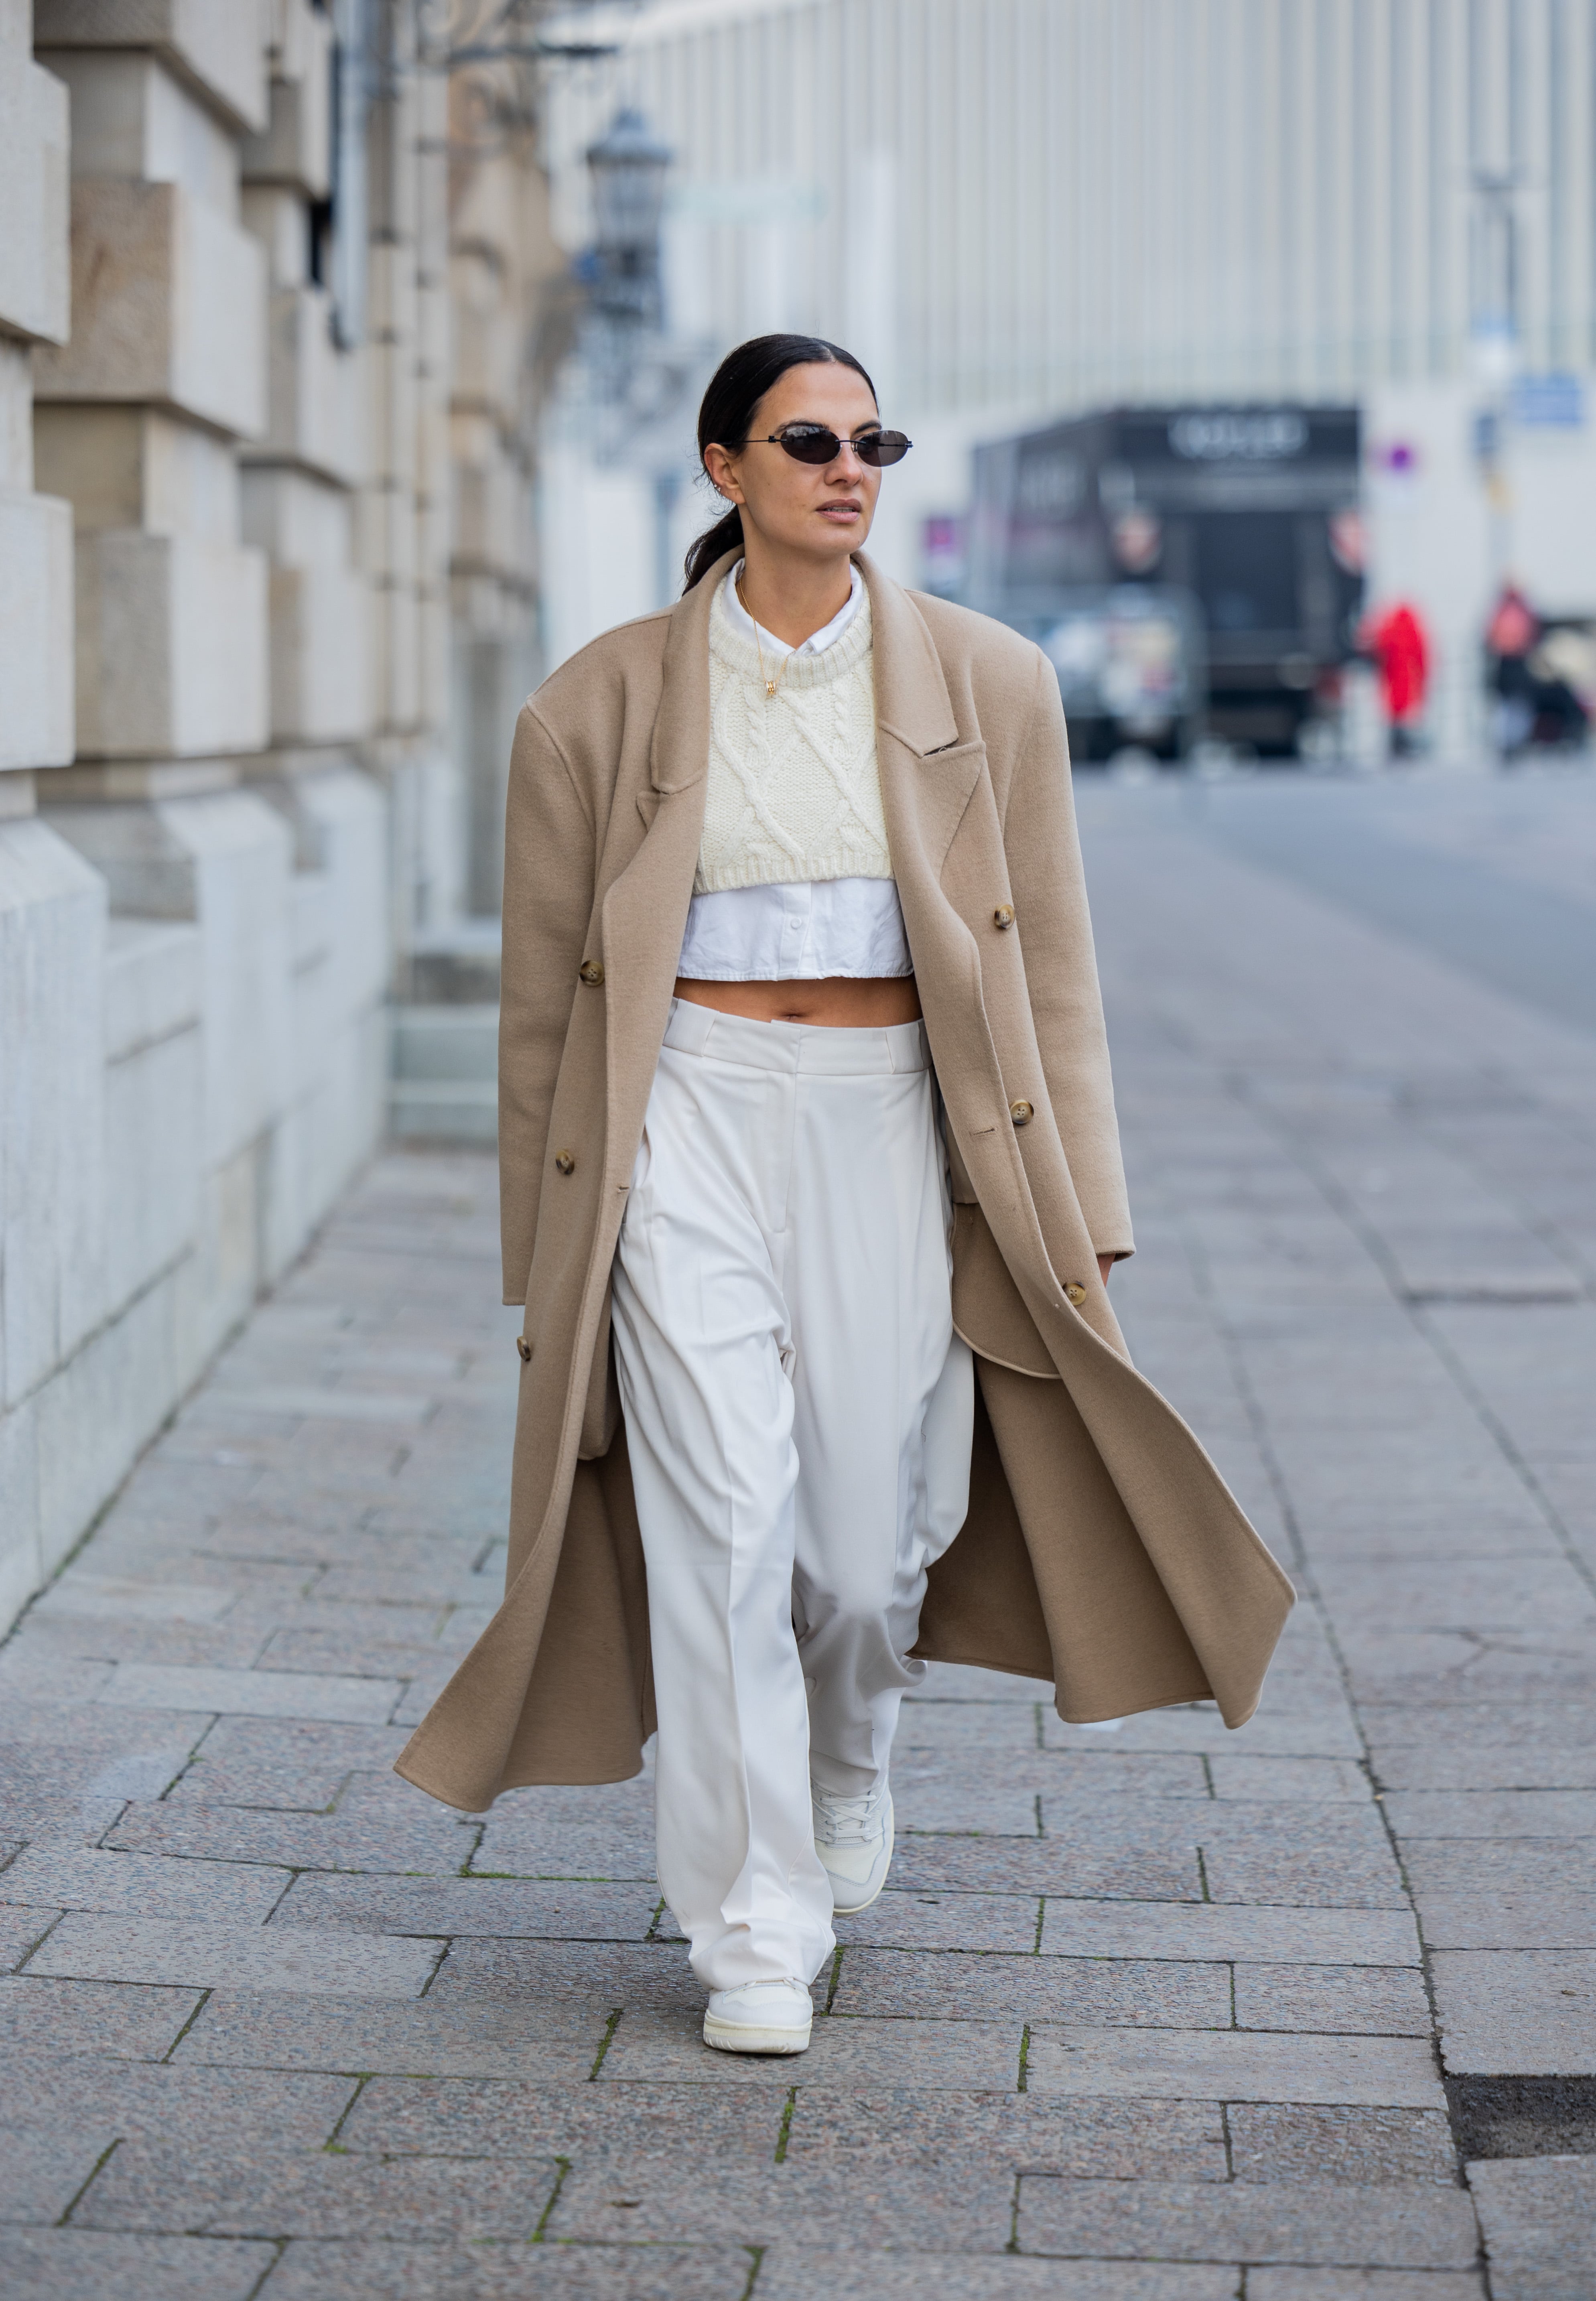 Styling White Jeans in The Winter